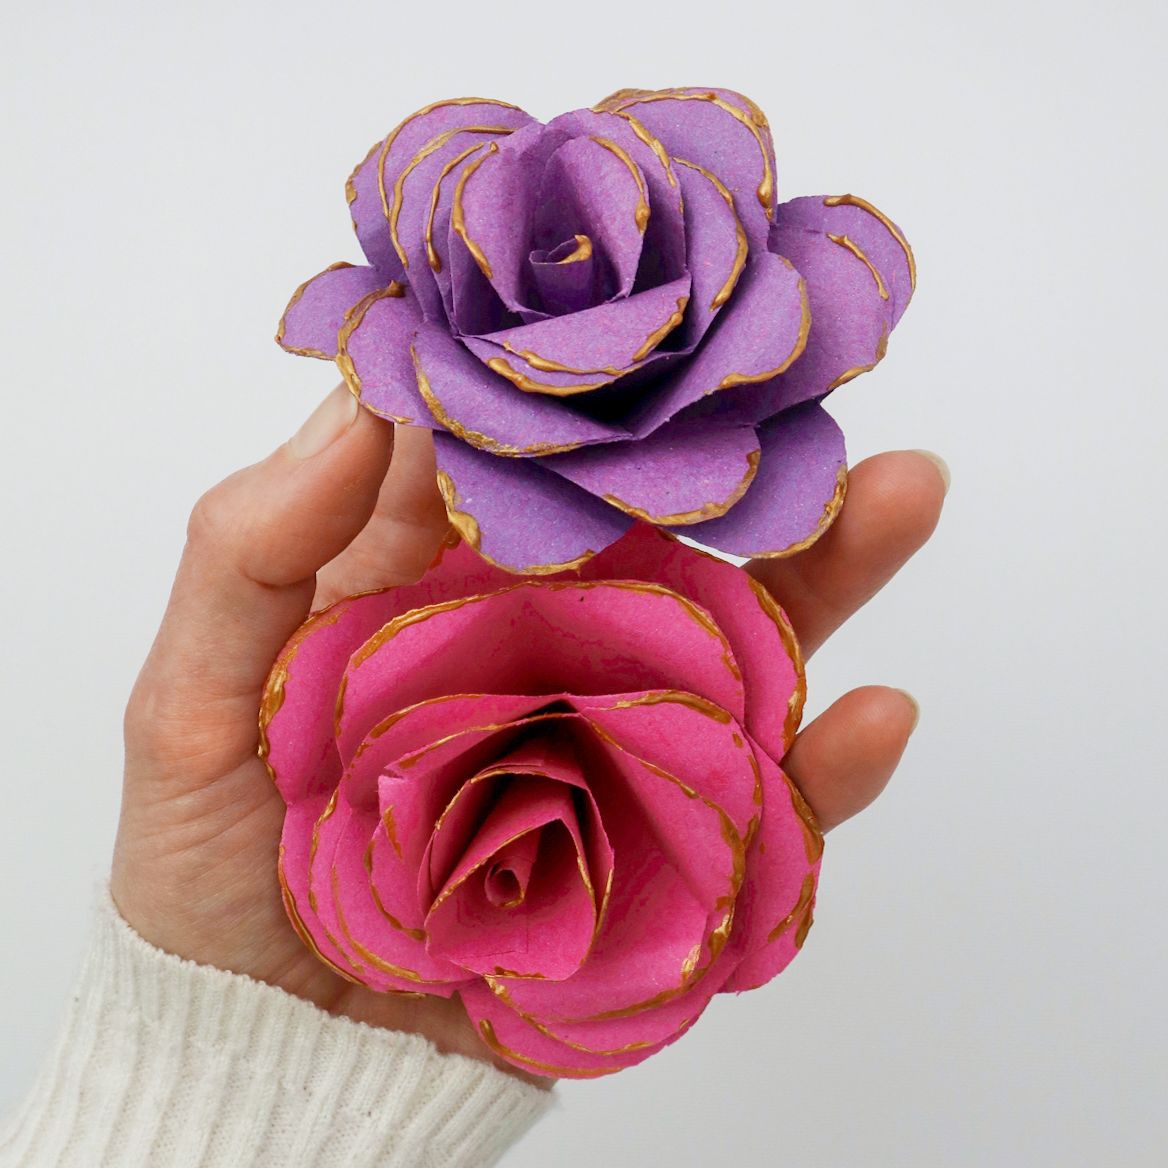 how to make paper roses step by step with pictures